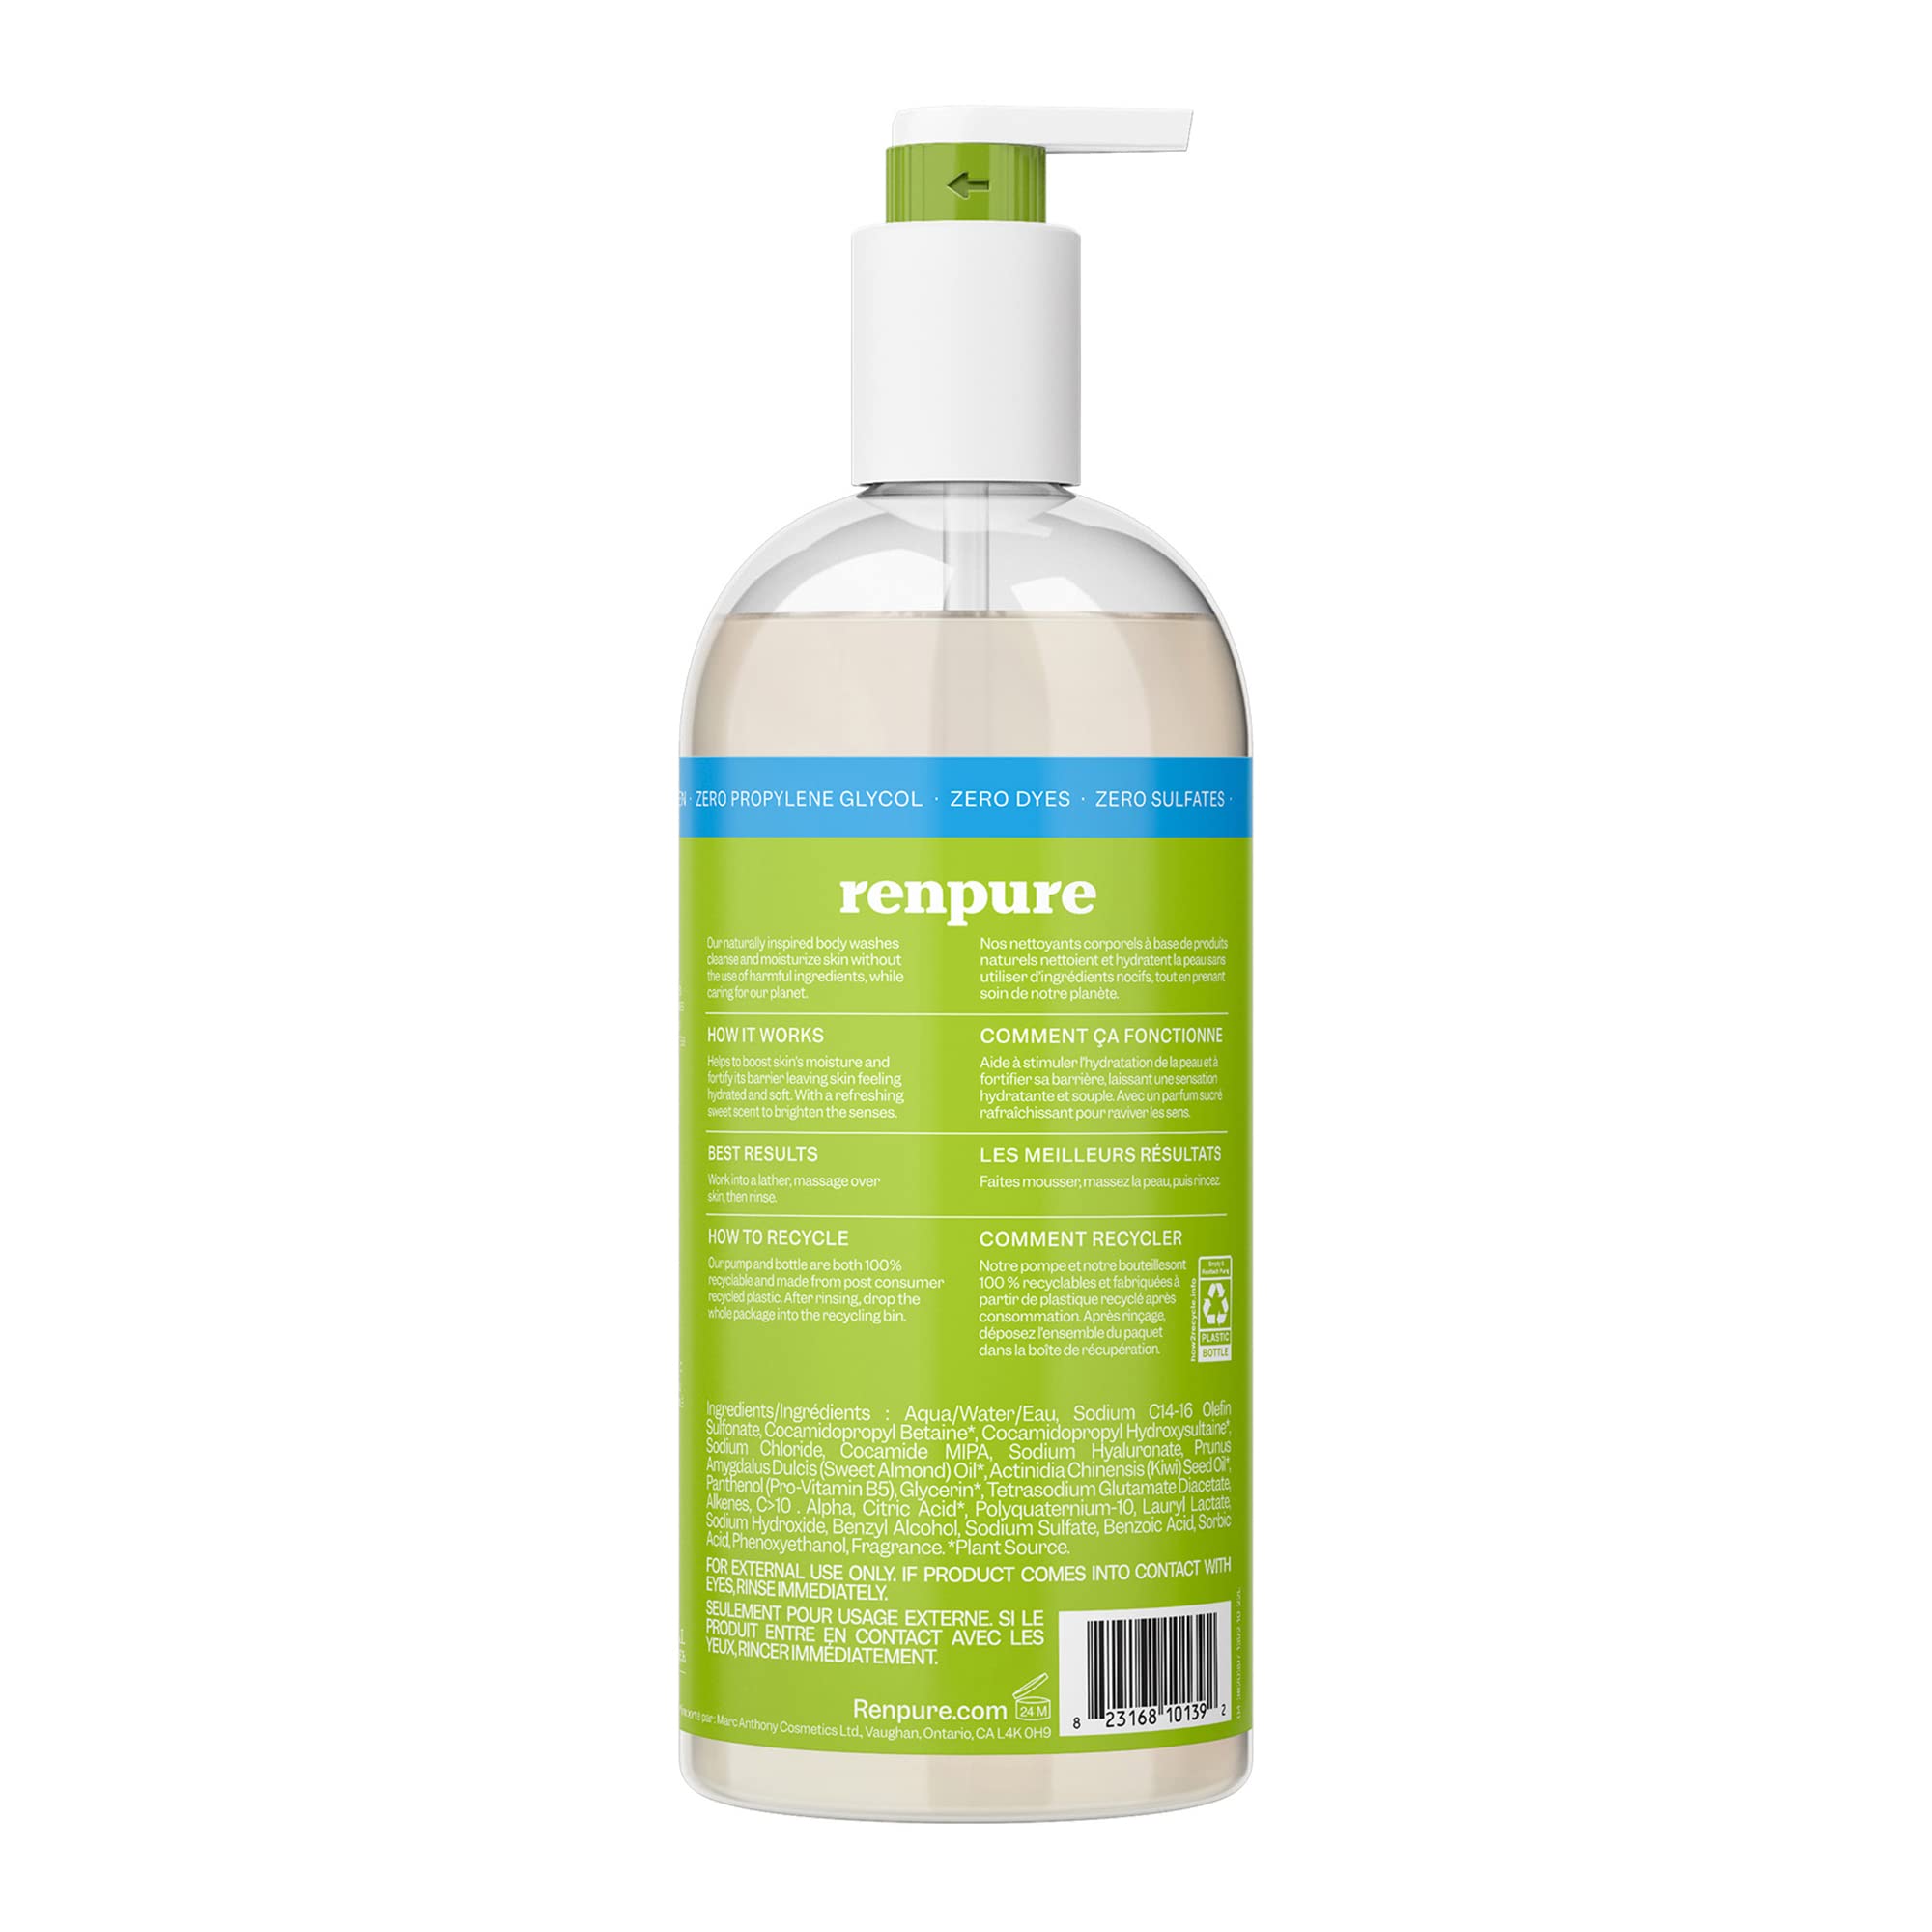 Renpure Kiwi and Hyaluronic Acid Ultra Hydrating Body Wash - Leaves Skin Moisturized - Rids Skin of Daily Grime - Gentle Formula - Dye and Paraben Free - Recyclable, Pump Bottle Design - 24 fl oz